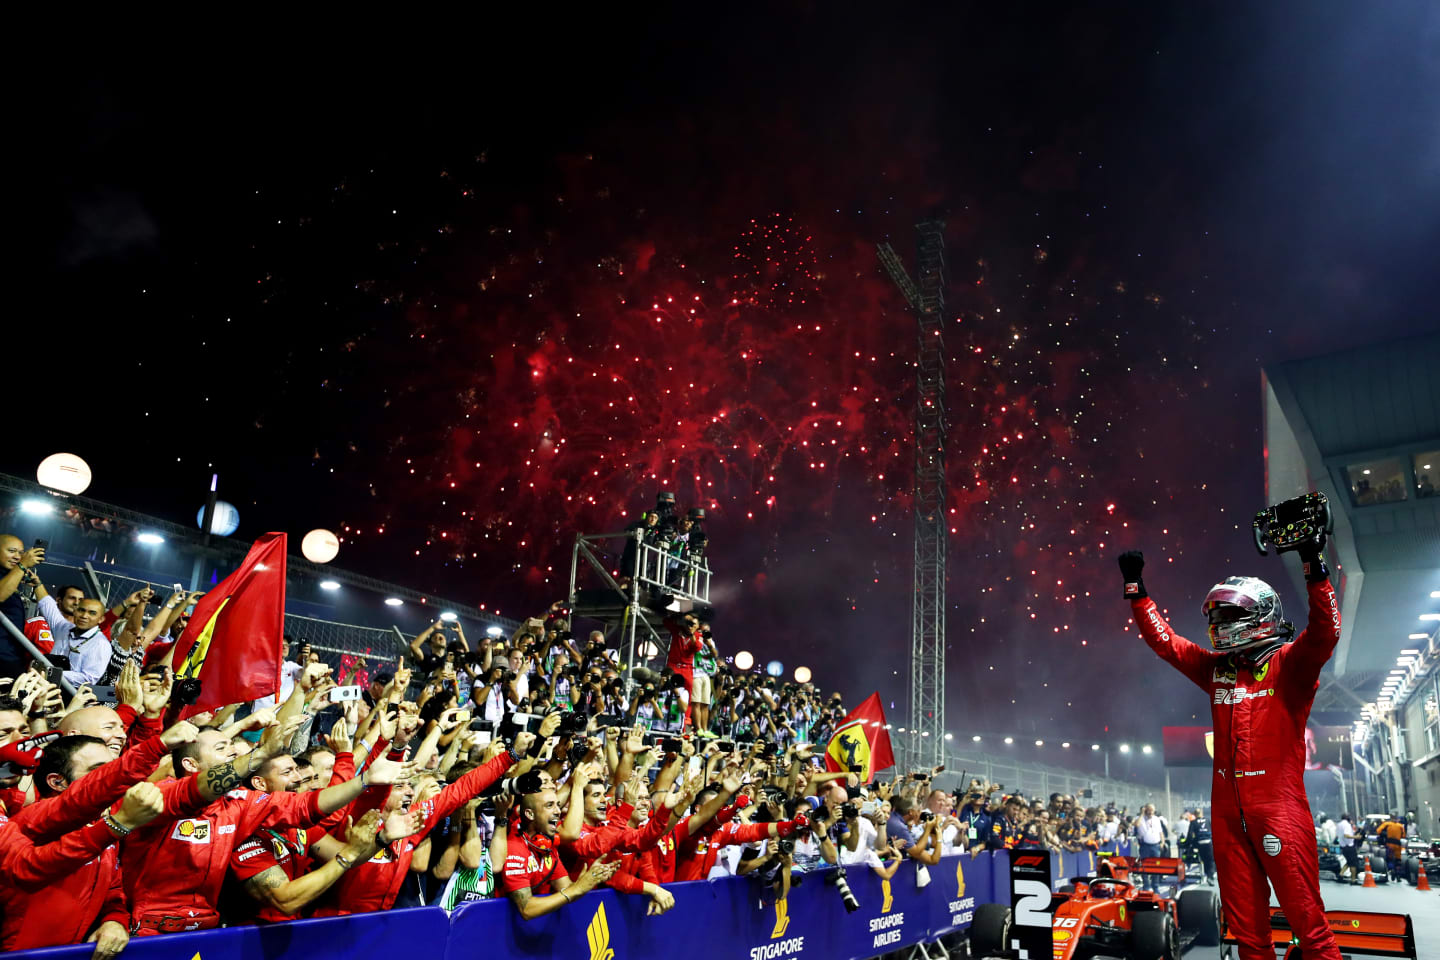 SINGAPORE, SINGAPORE - SEPTEMBER 22: Race winner Sebastian Vettel of Germany and Ferrari celebrates in parc ferme during the F1 Grand Prix of Singapore at Marina Bay Street Circuit on September 22, 2019 in Singapore. (Photo by Lars Baron/Getty Images)